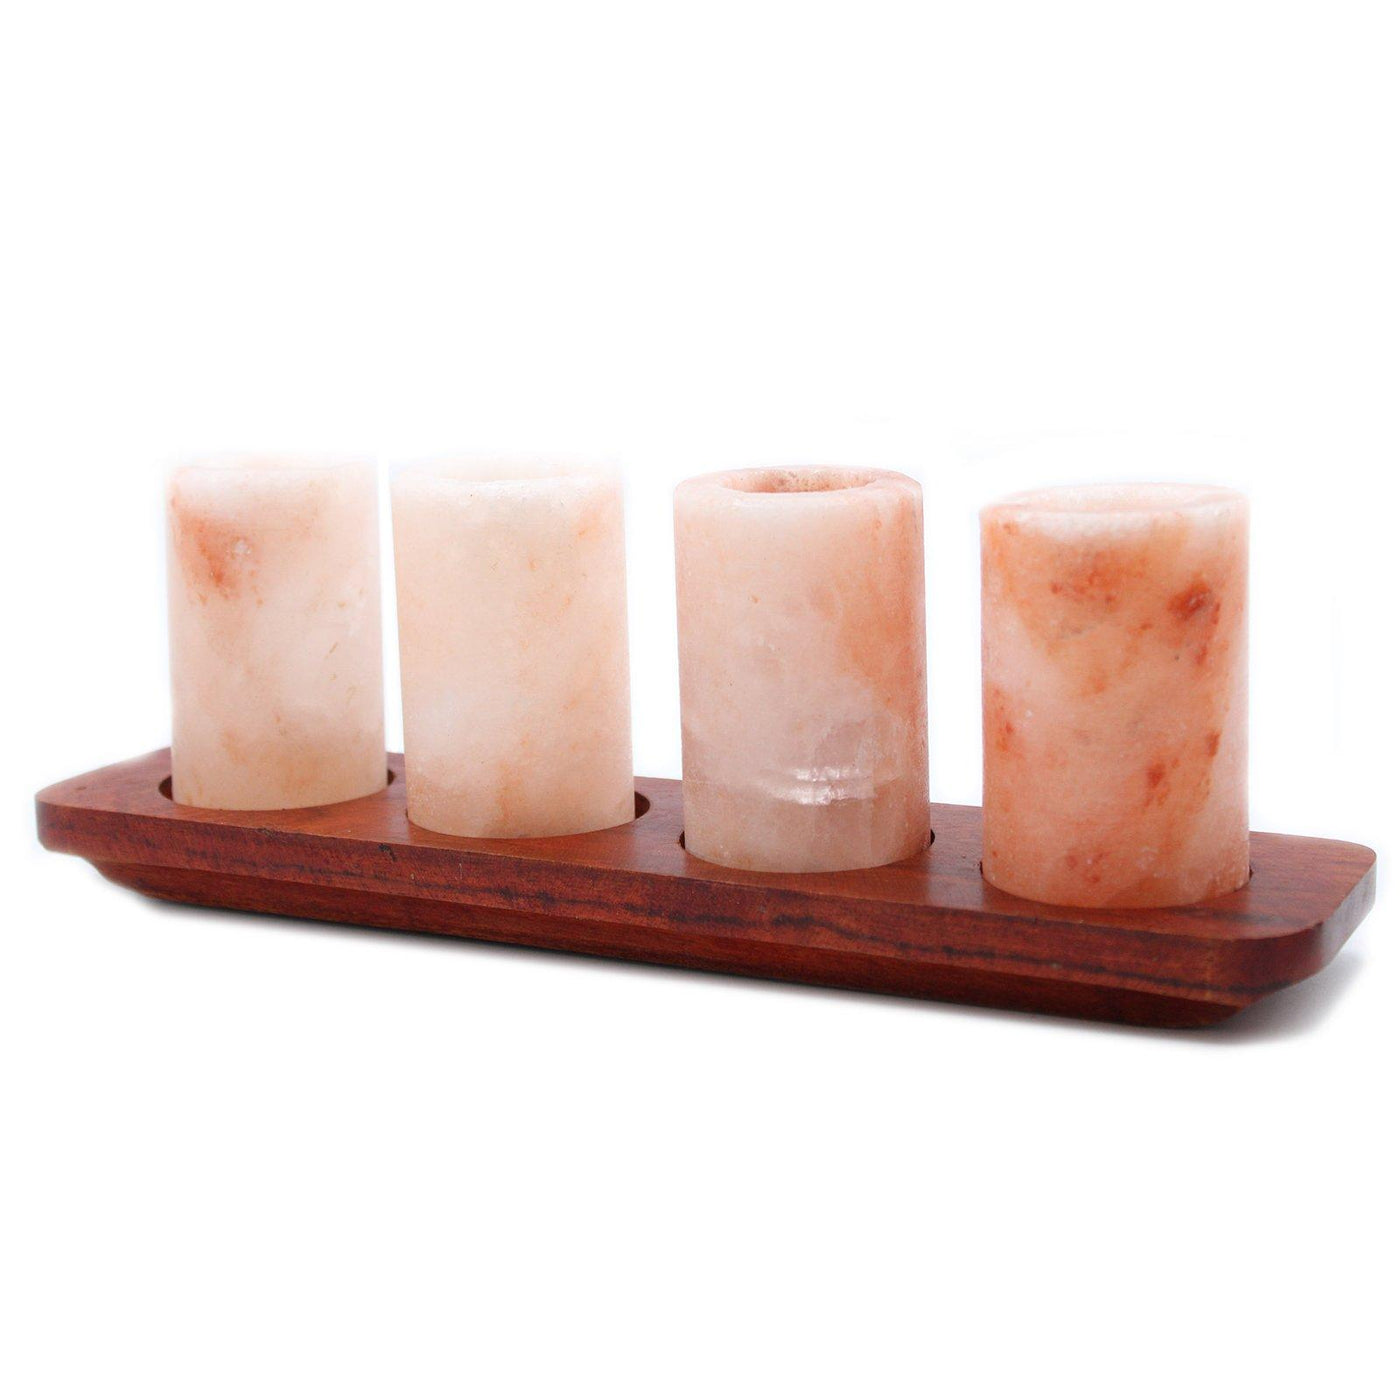 Set of 4 Himalayan Salt Shot Glasses With Wooden Serving Tray, Christmas gift